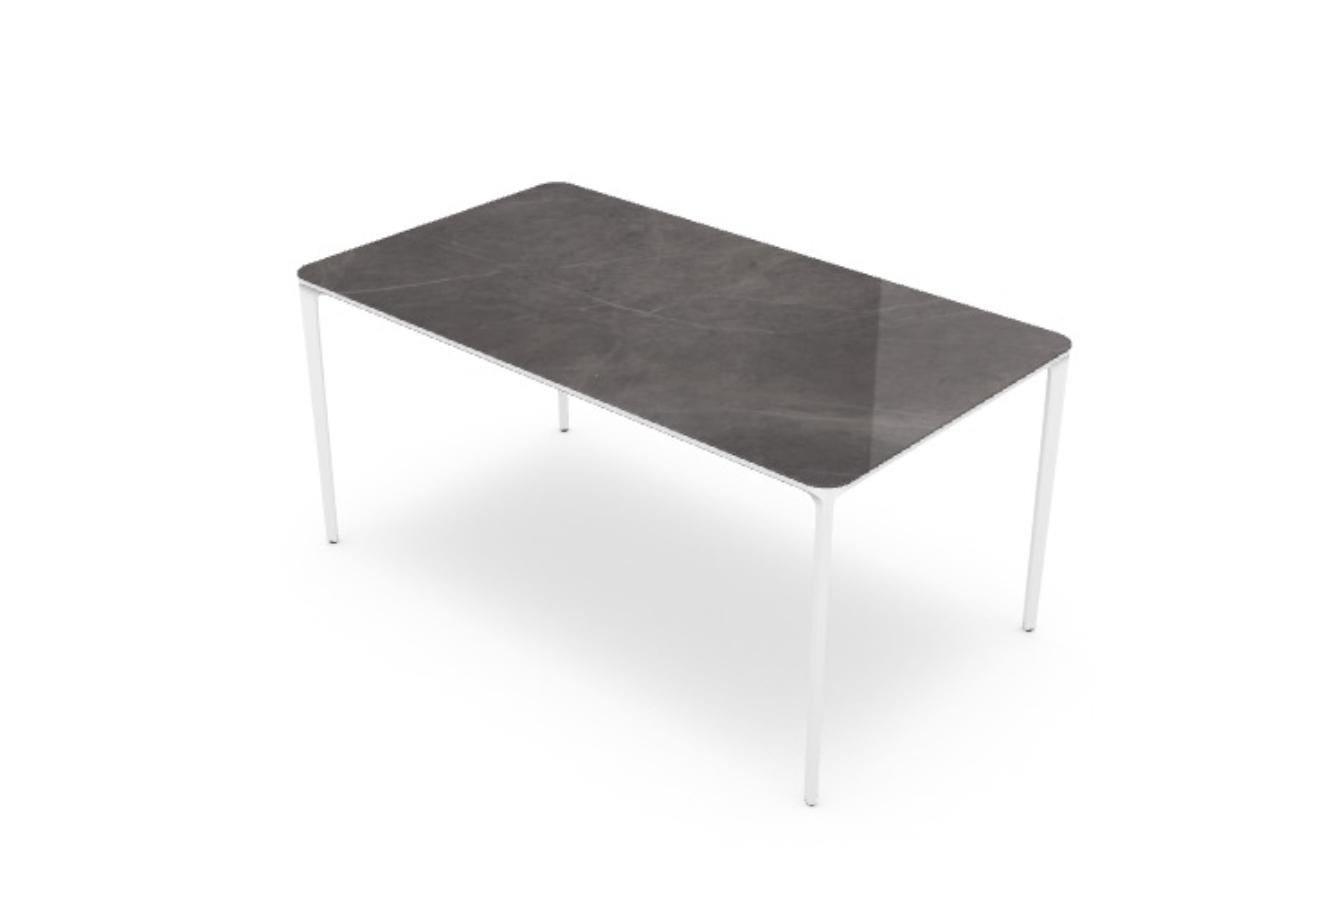 Slim outdoor ceramic dining table
In stock in Los Angeles

Dining table with die-cast aluminium legs, polished chrome finish or lacquered, various finishes, and anodized or lacquered, various finishes, aluminium structure profile. Tempered glass